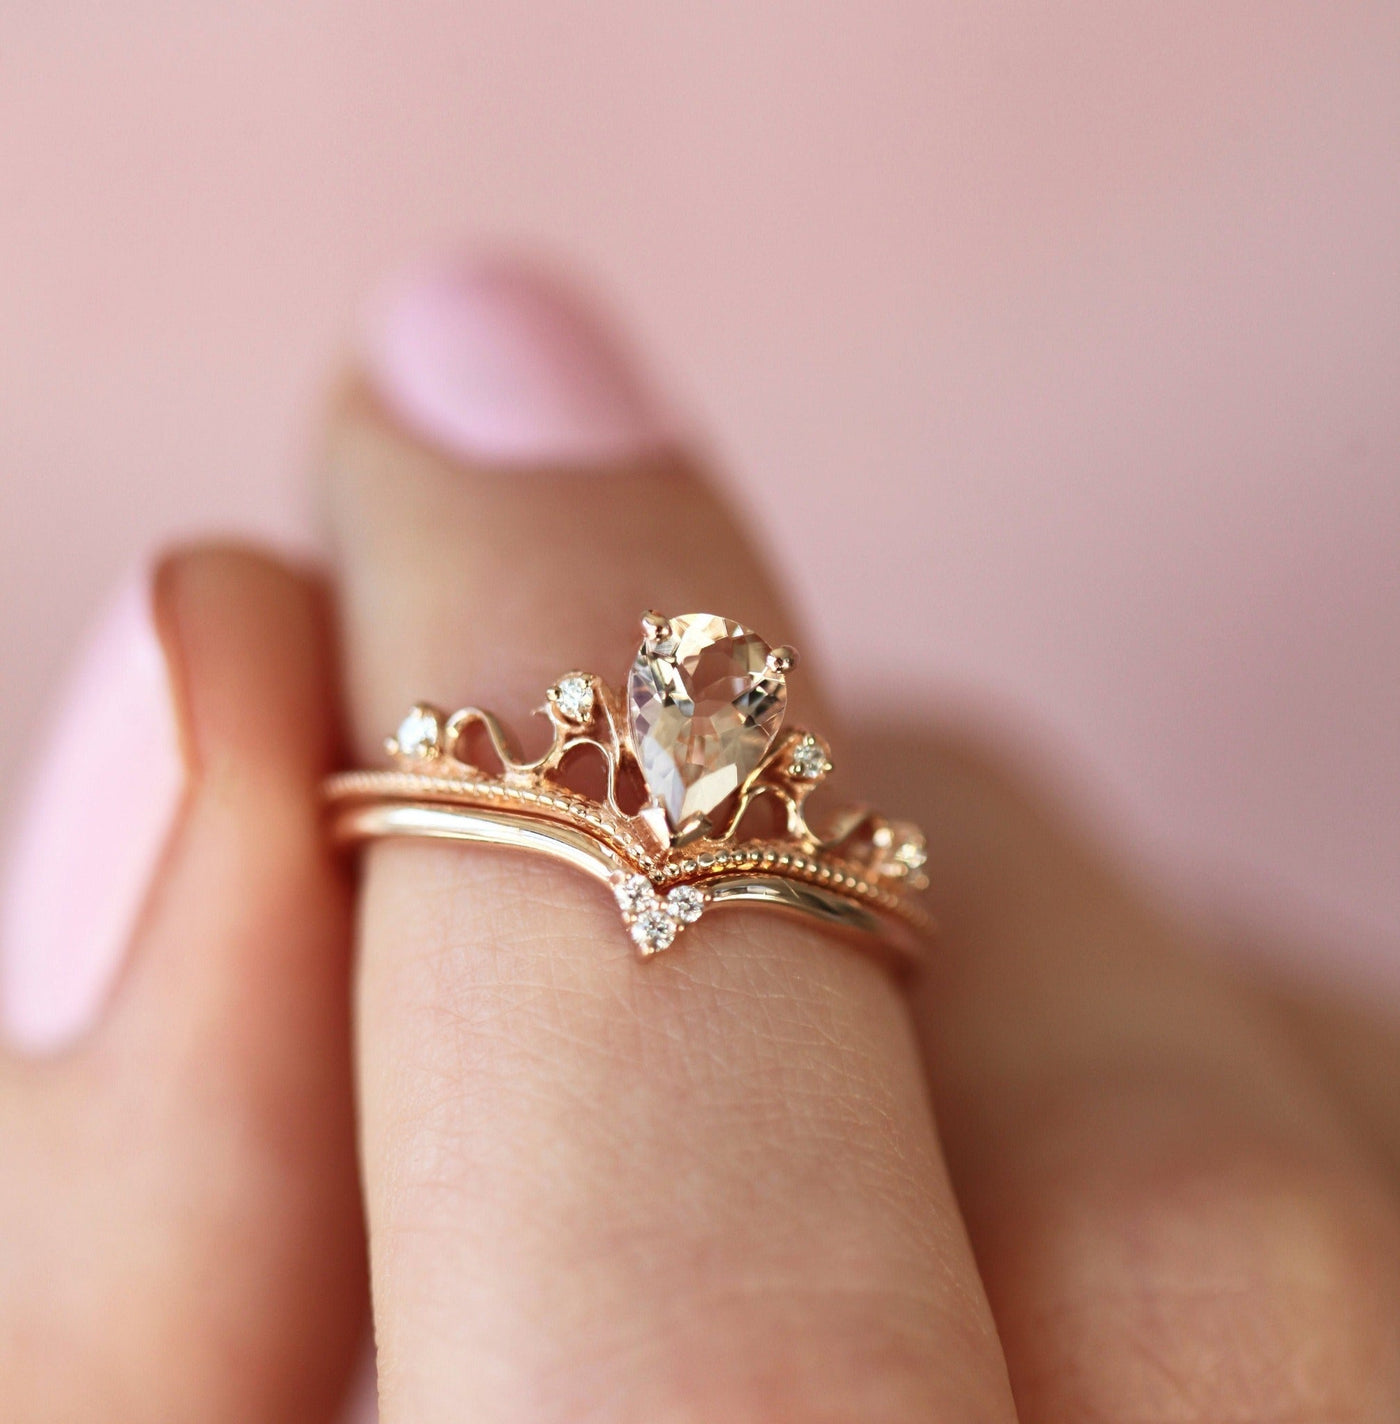 Vintage pear-shaped pink morganite ring with side diamonds